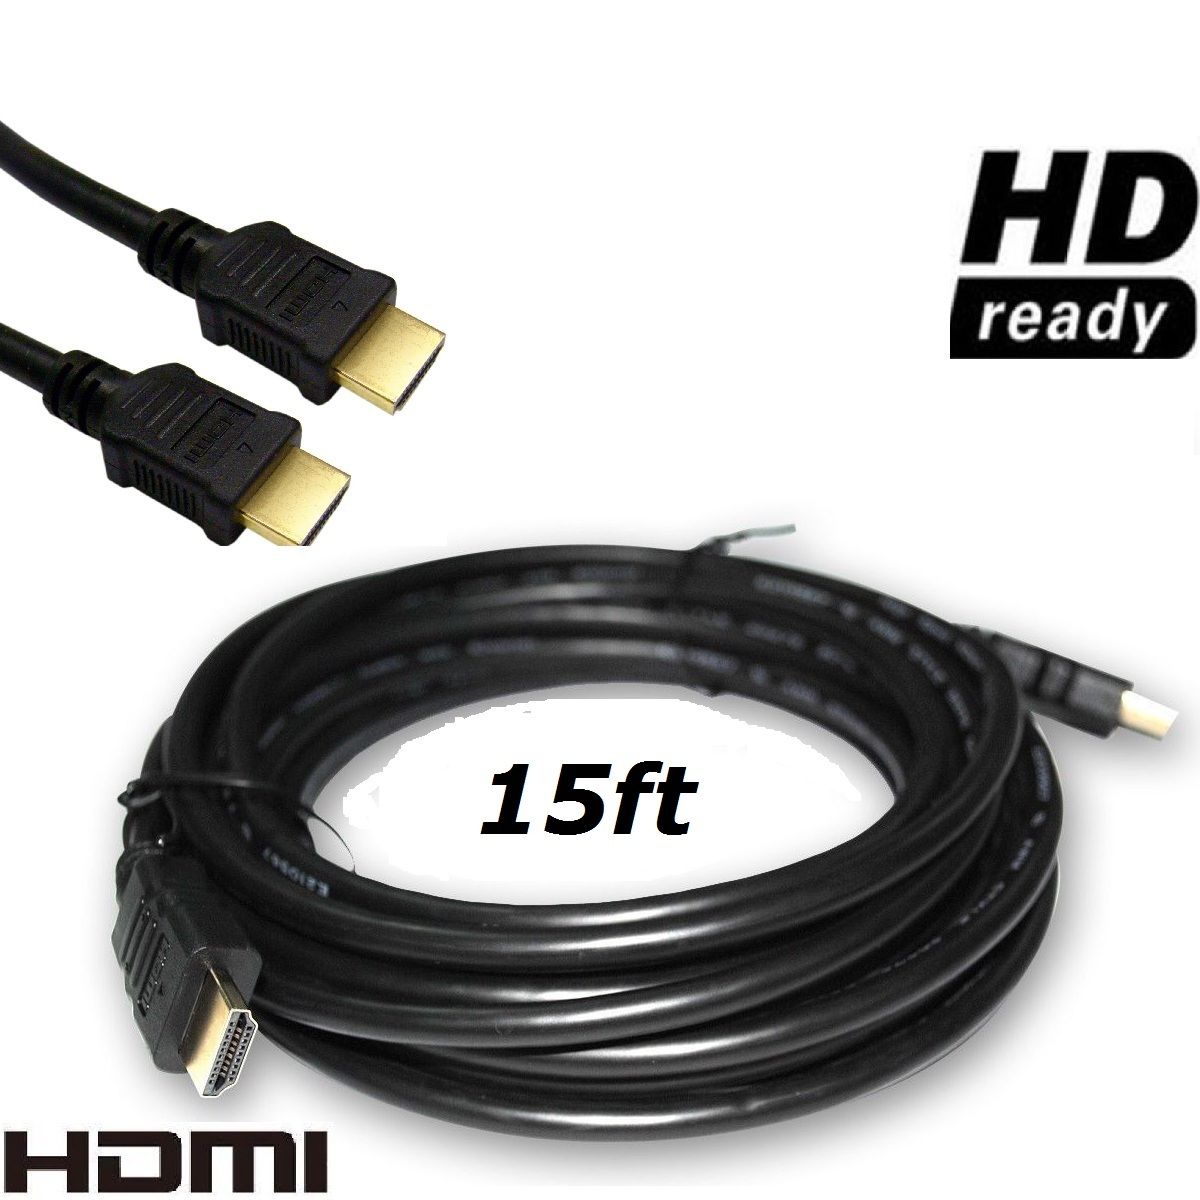 CableVantage HDMI Cable Cord For TV HDTV Xbox Xbox 360 Xbox One PS3 PS4 HD Wii U LCD Plasma Blu-ray DVD Player 3FT 6FT 10FT 15FT 25FT 30FT 50FT 75FT 100FT BLACK - image 1 of 1